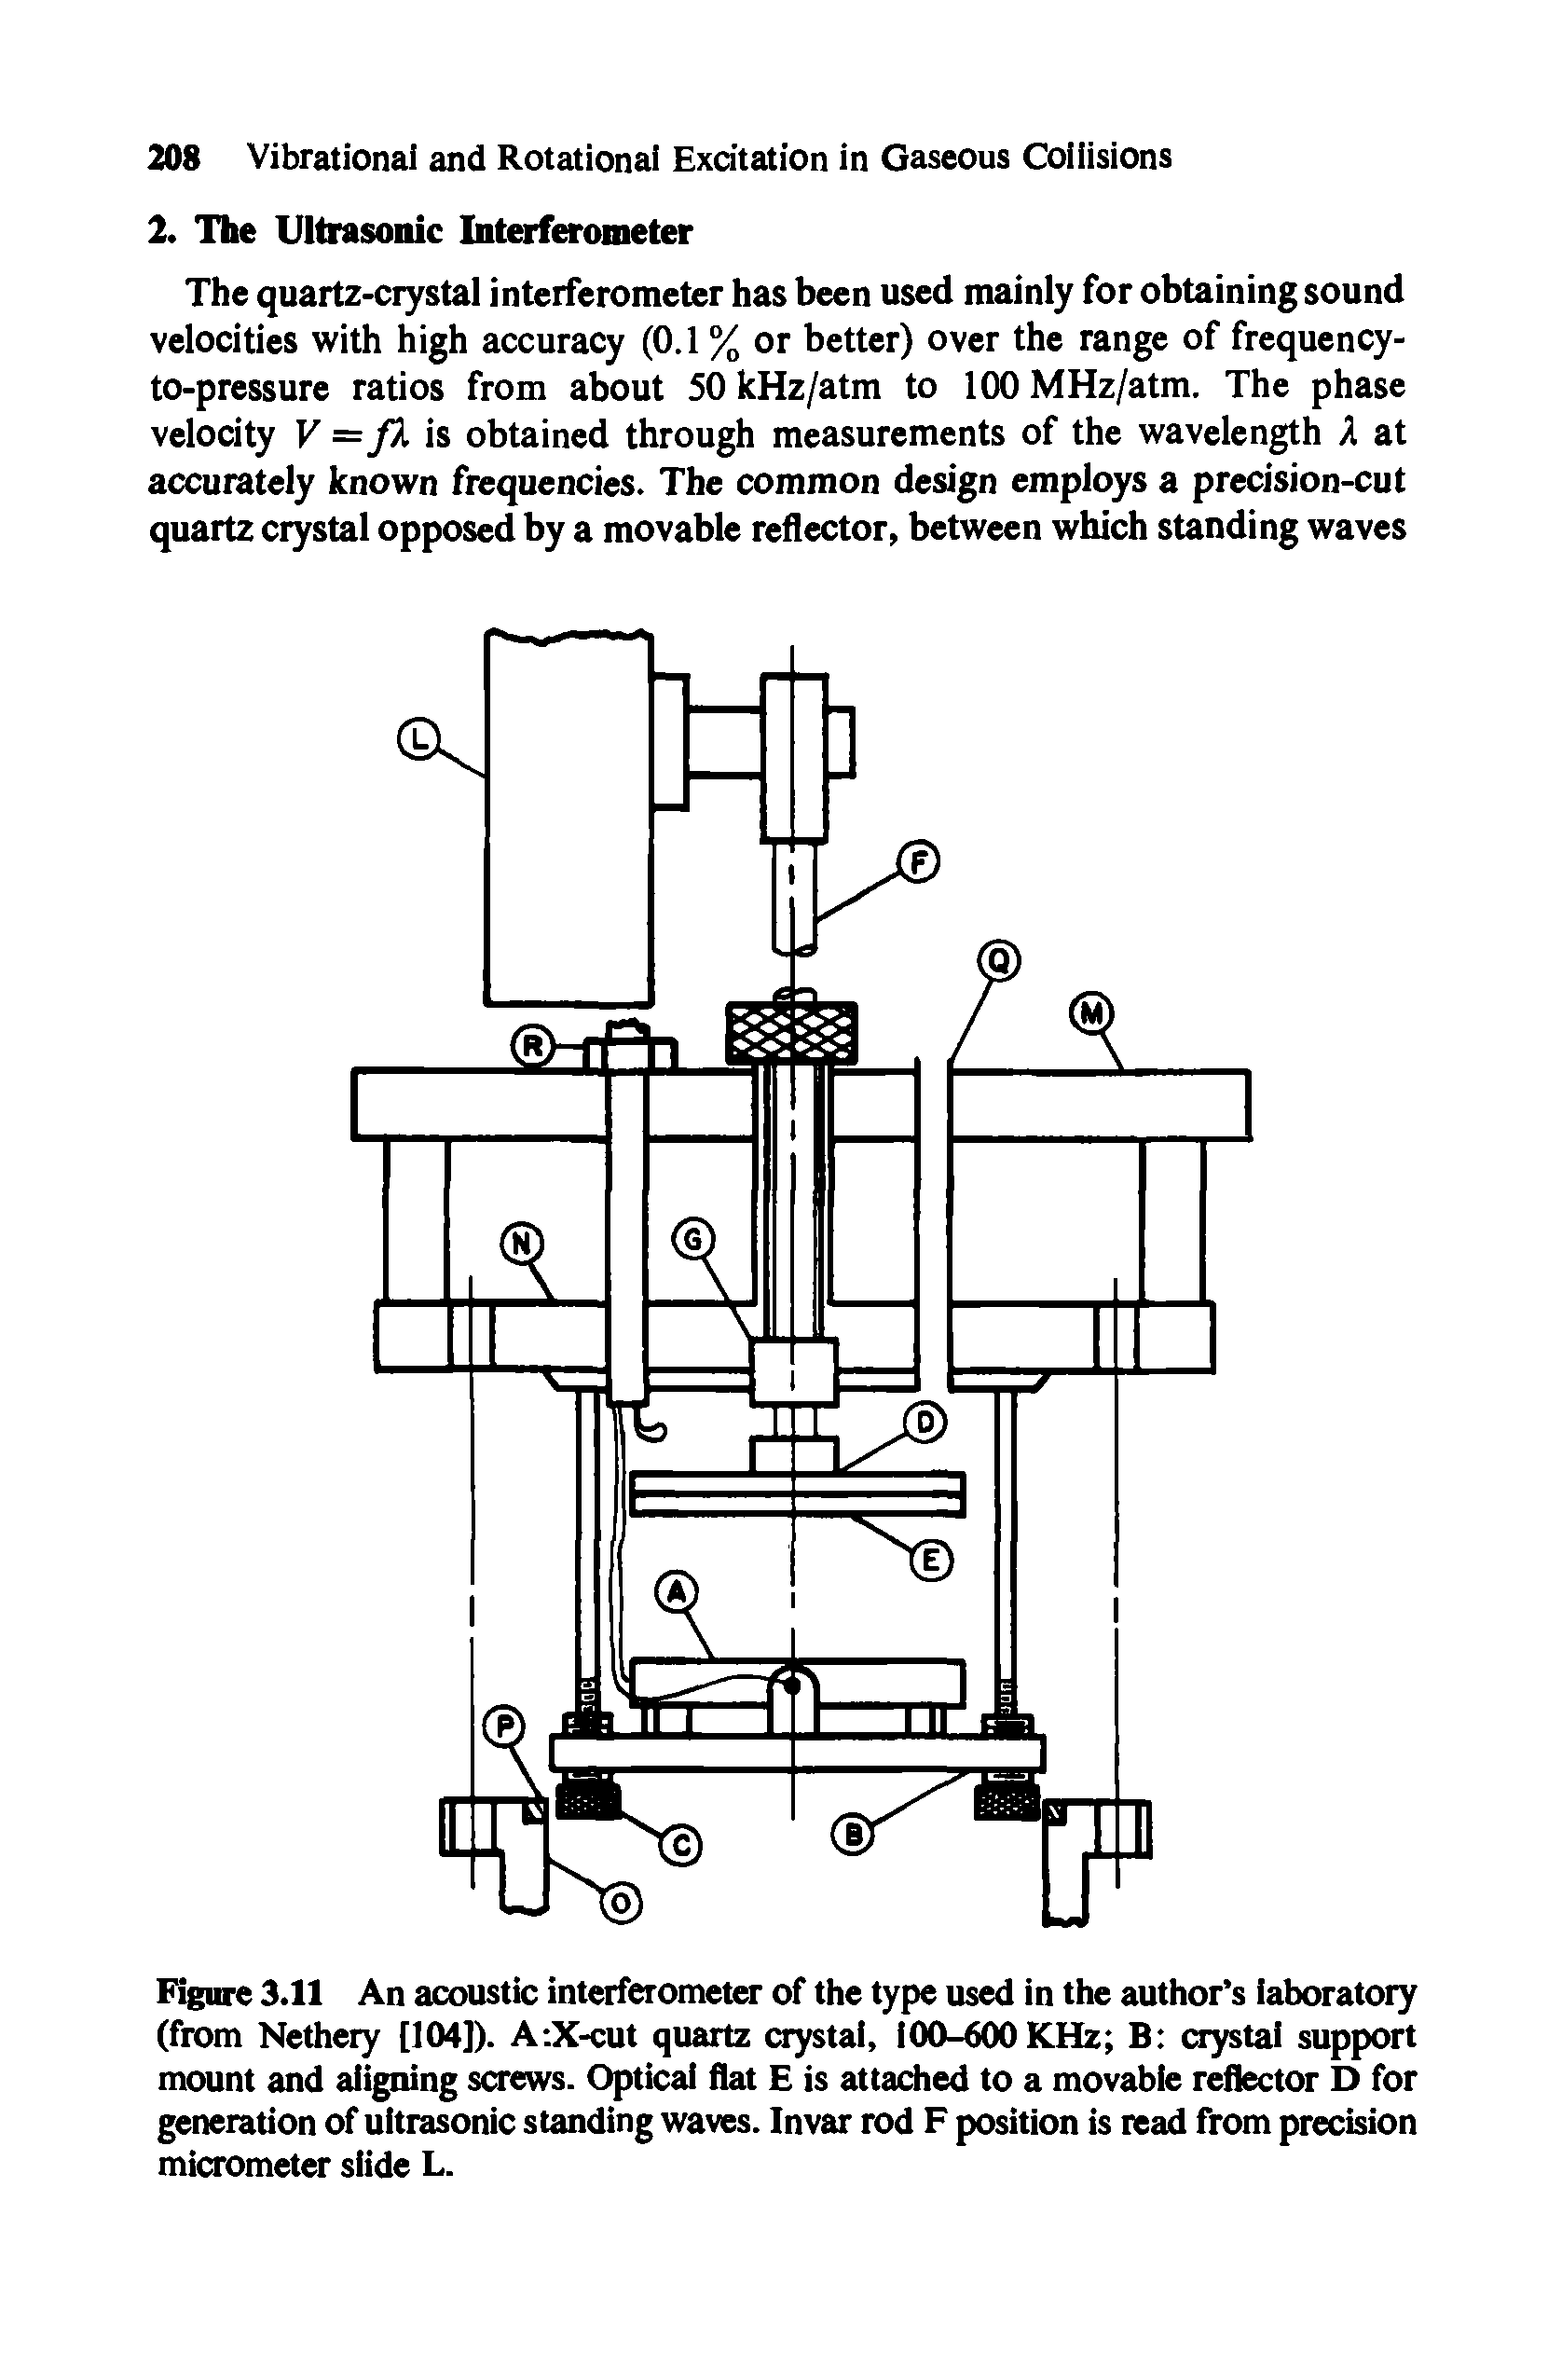 Figure 3.11 An acoustic interferometer of the type used in the author s laboratory (from Nethery [104]). A X-cut quartz crystal, 100-600 KHz B crystal support mount and aligning screws. Optical flat E is attached to a movable reflector D for generation of ultrasonic standing waves. Invar rod F position is read from precision micrometer slide L.